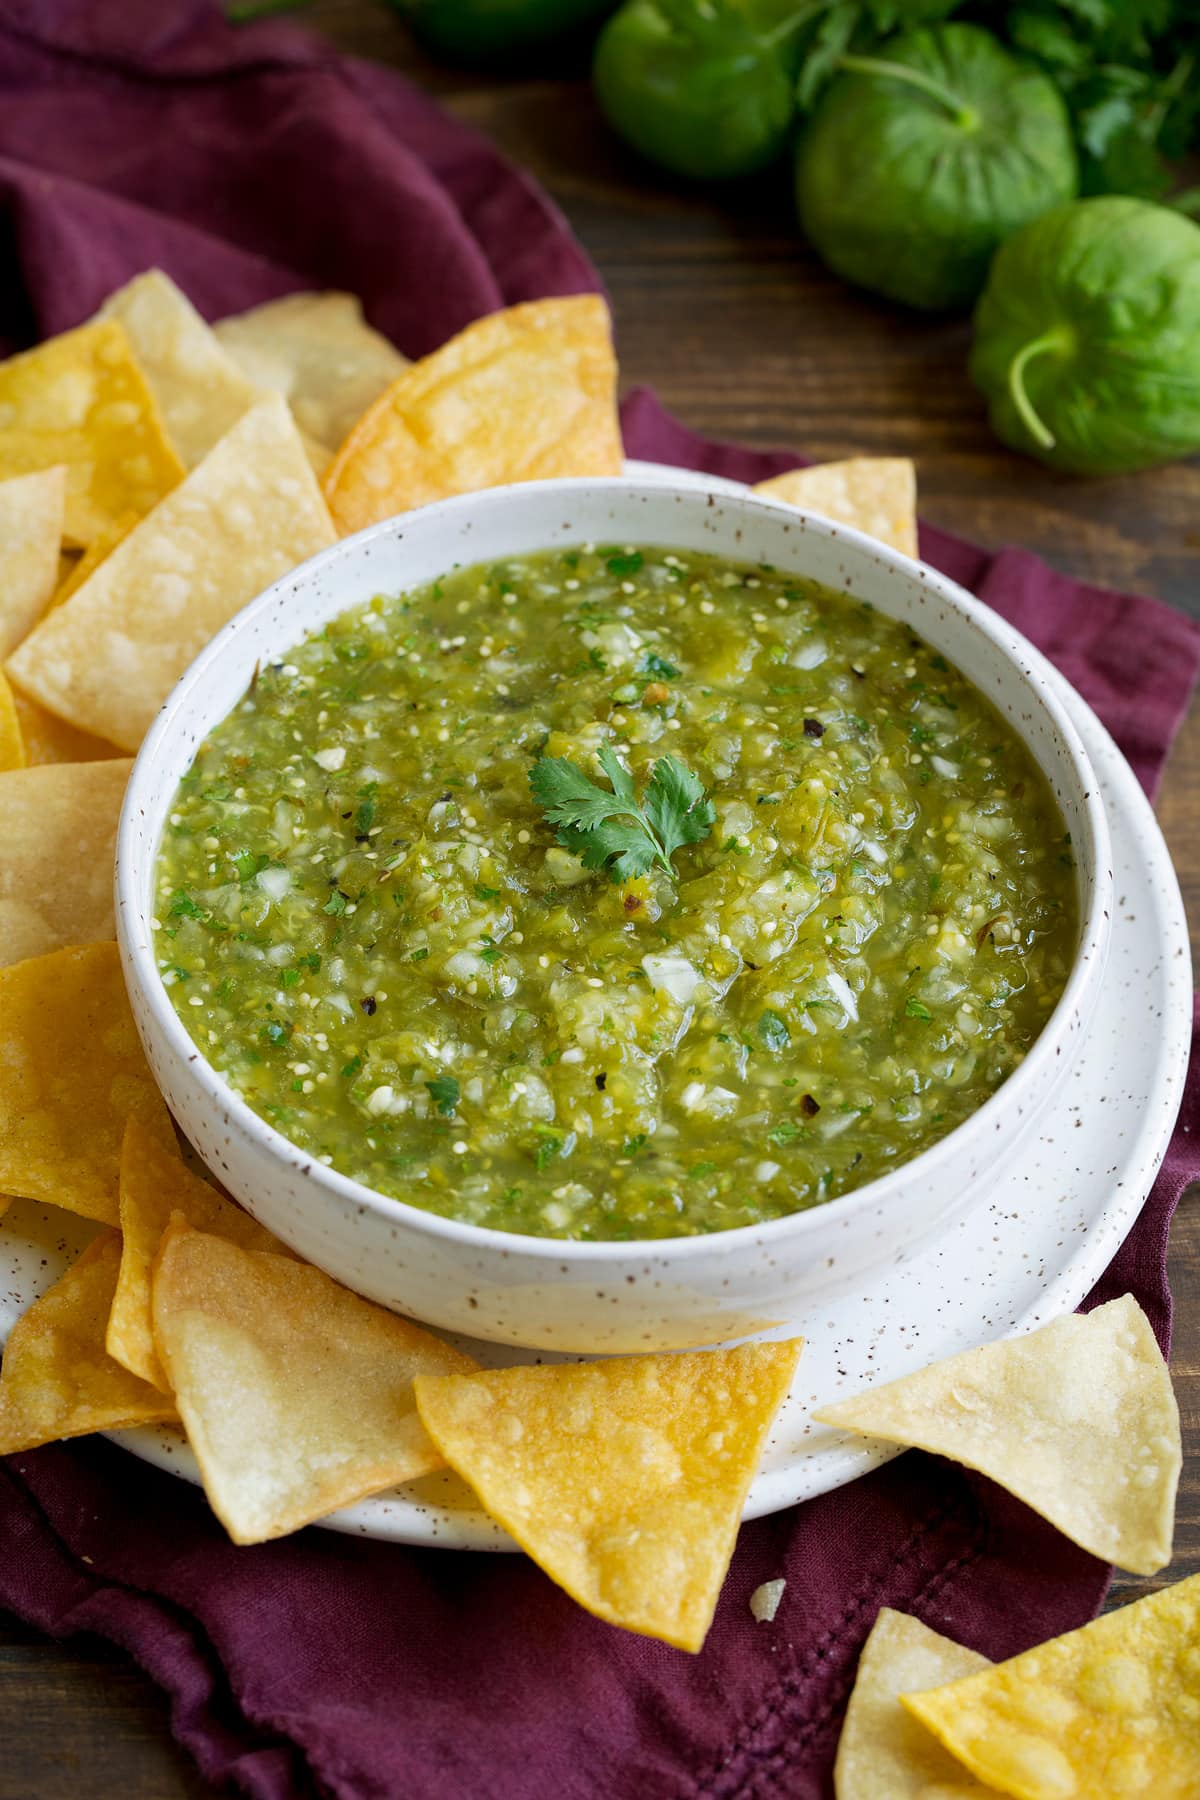 Salsa Verde in a bowl with a side of tortilla chips.